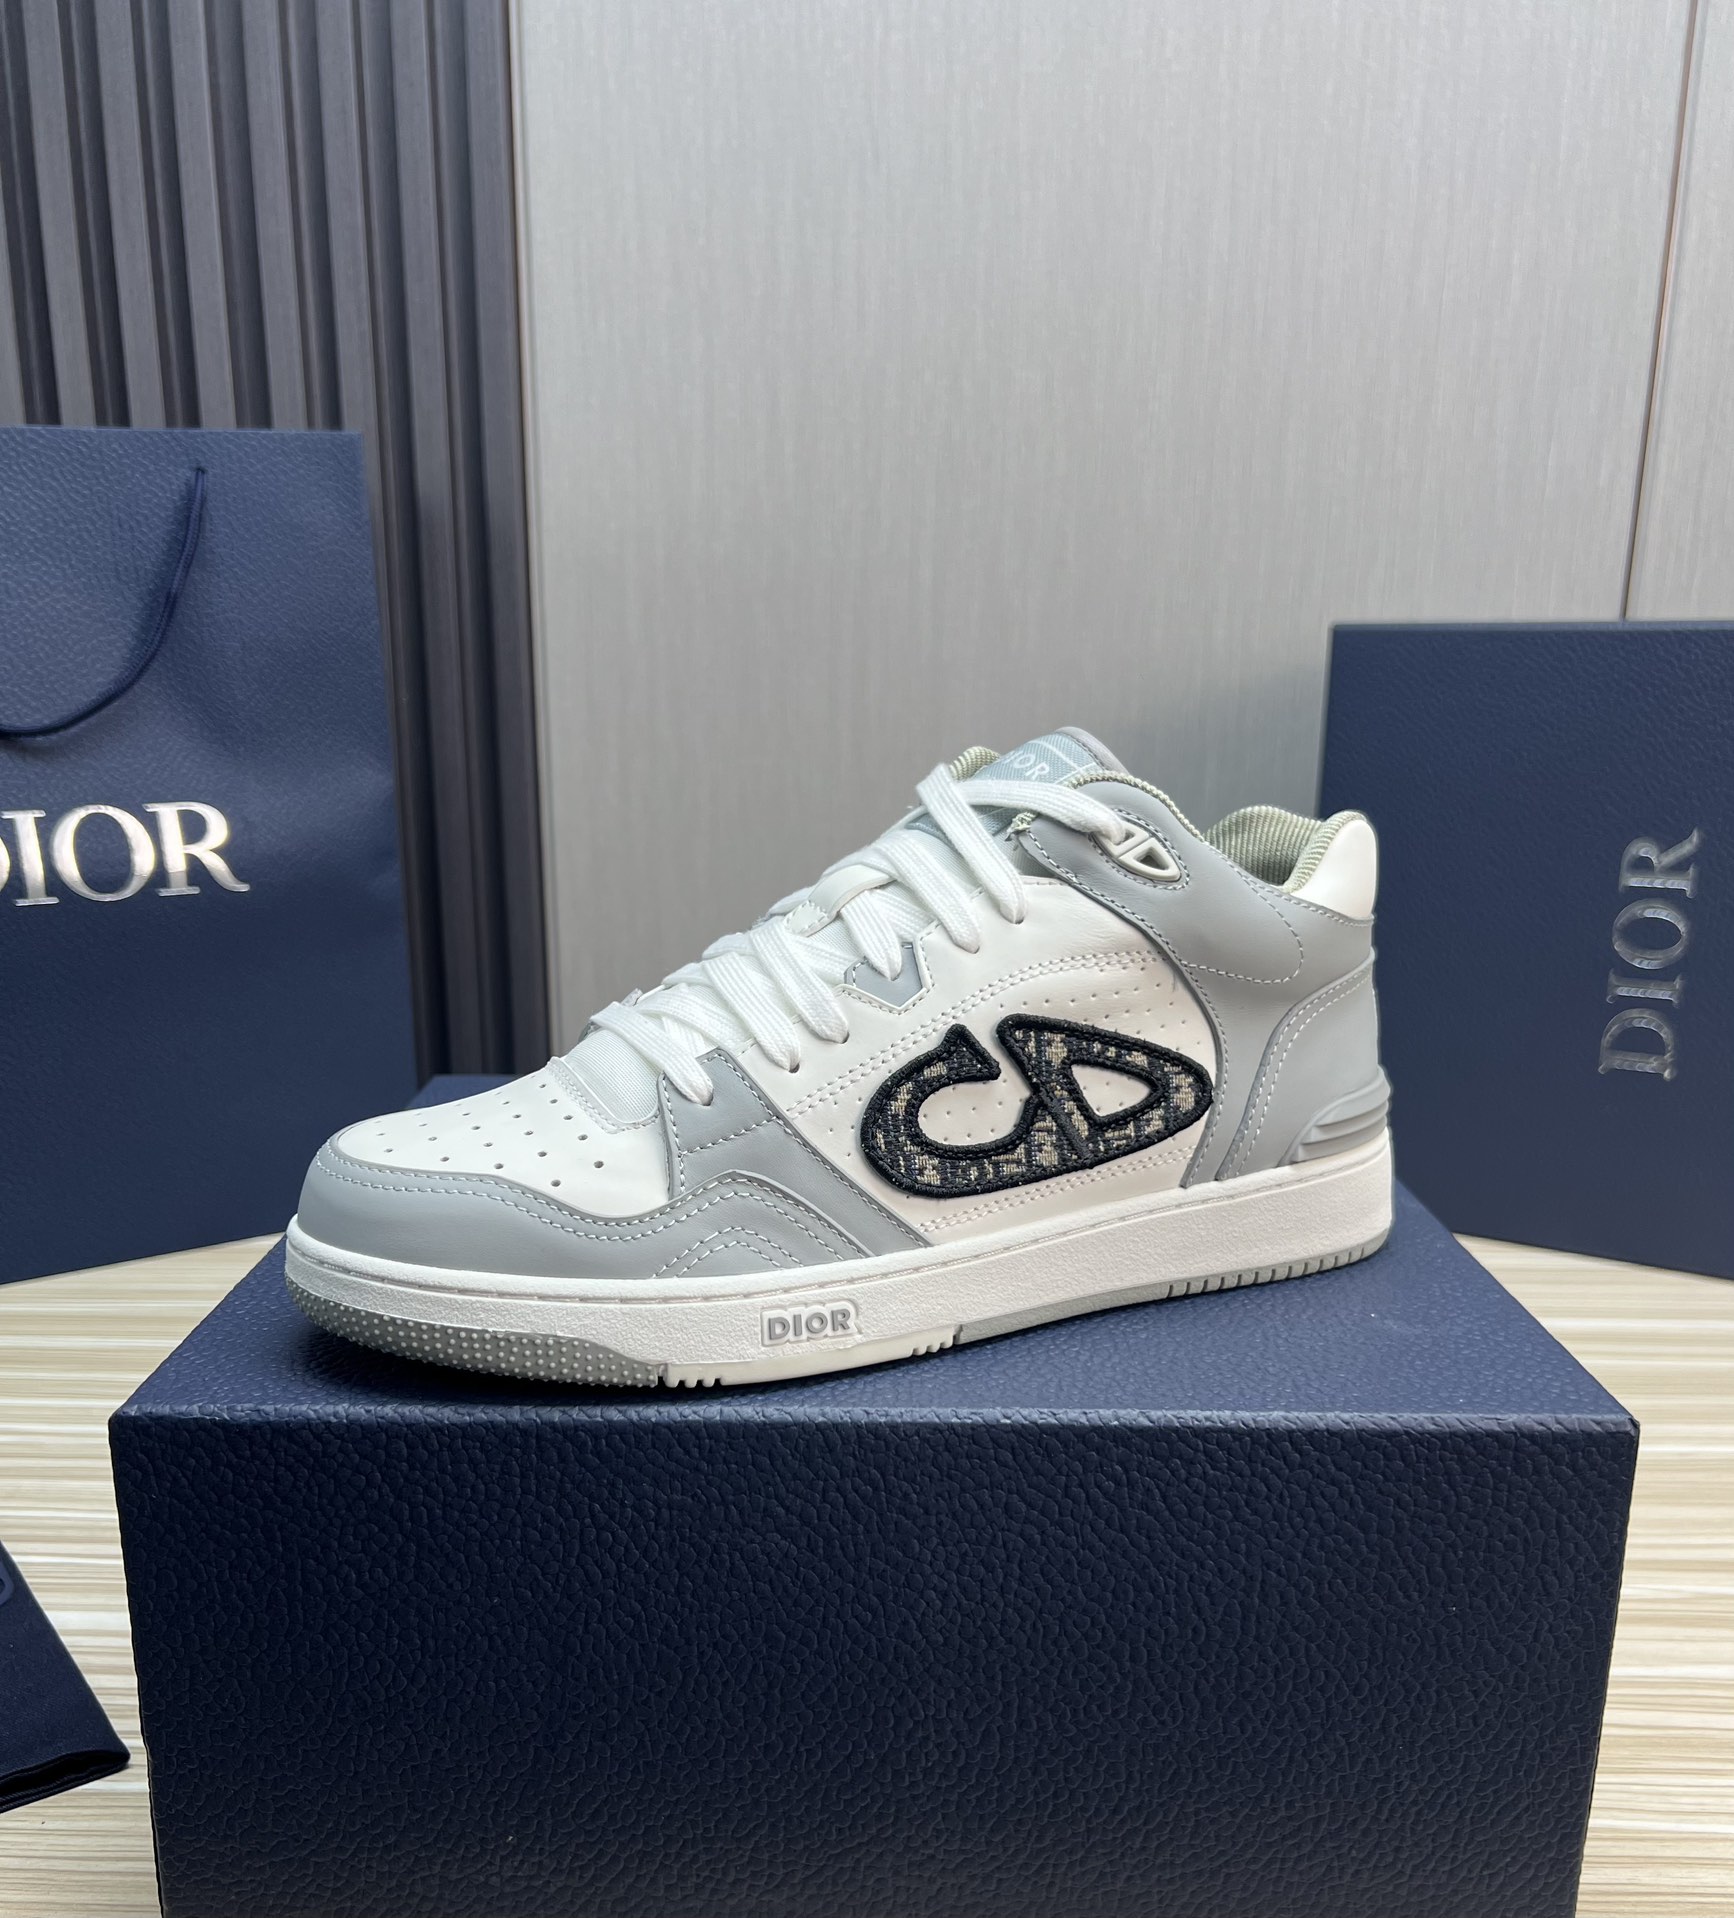 Dior Skateboard Shoes Sneakers Grey White Unisex Calfskin Cowhide TPU Spring Collection Oblique Mid Tops